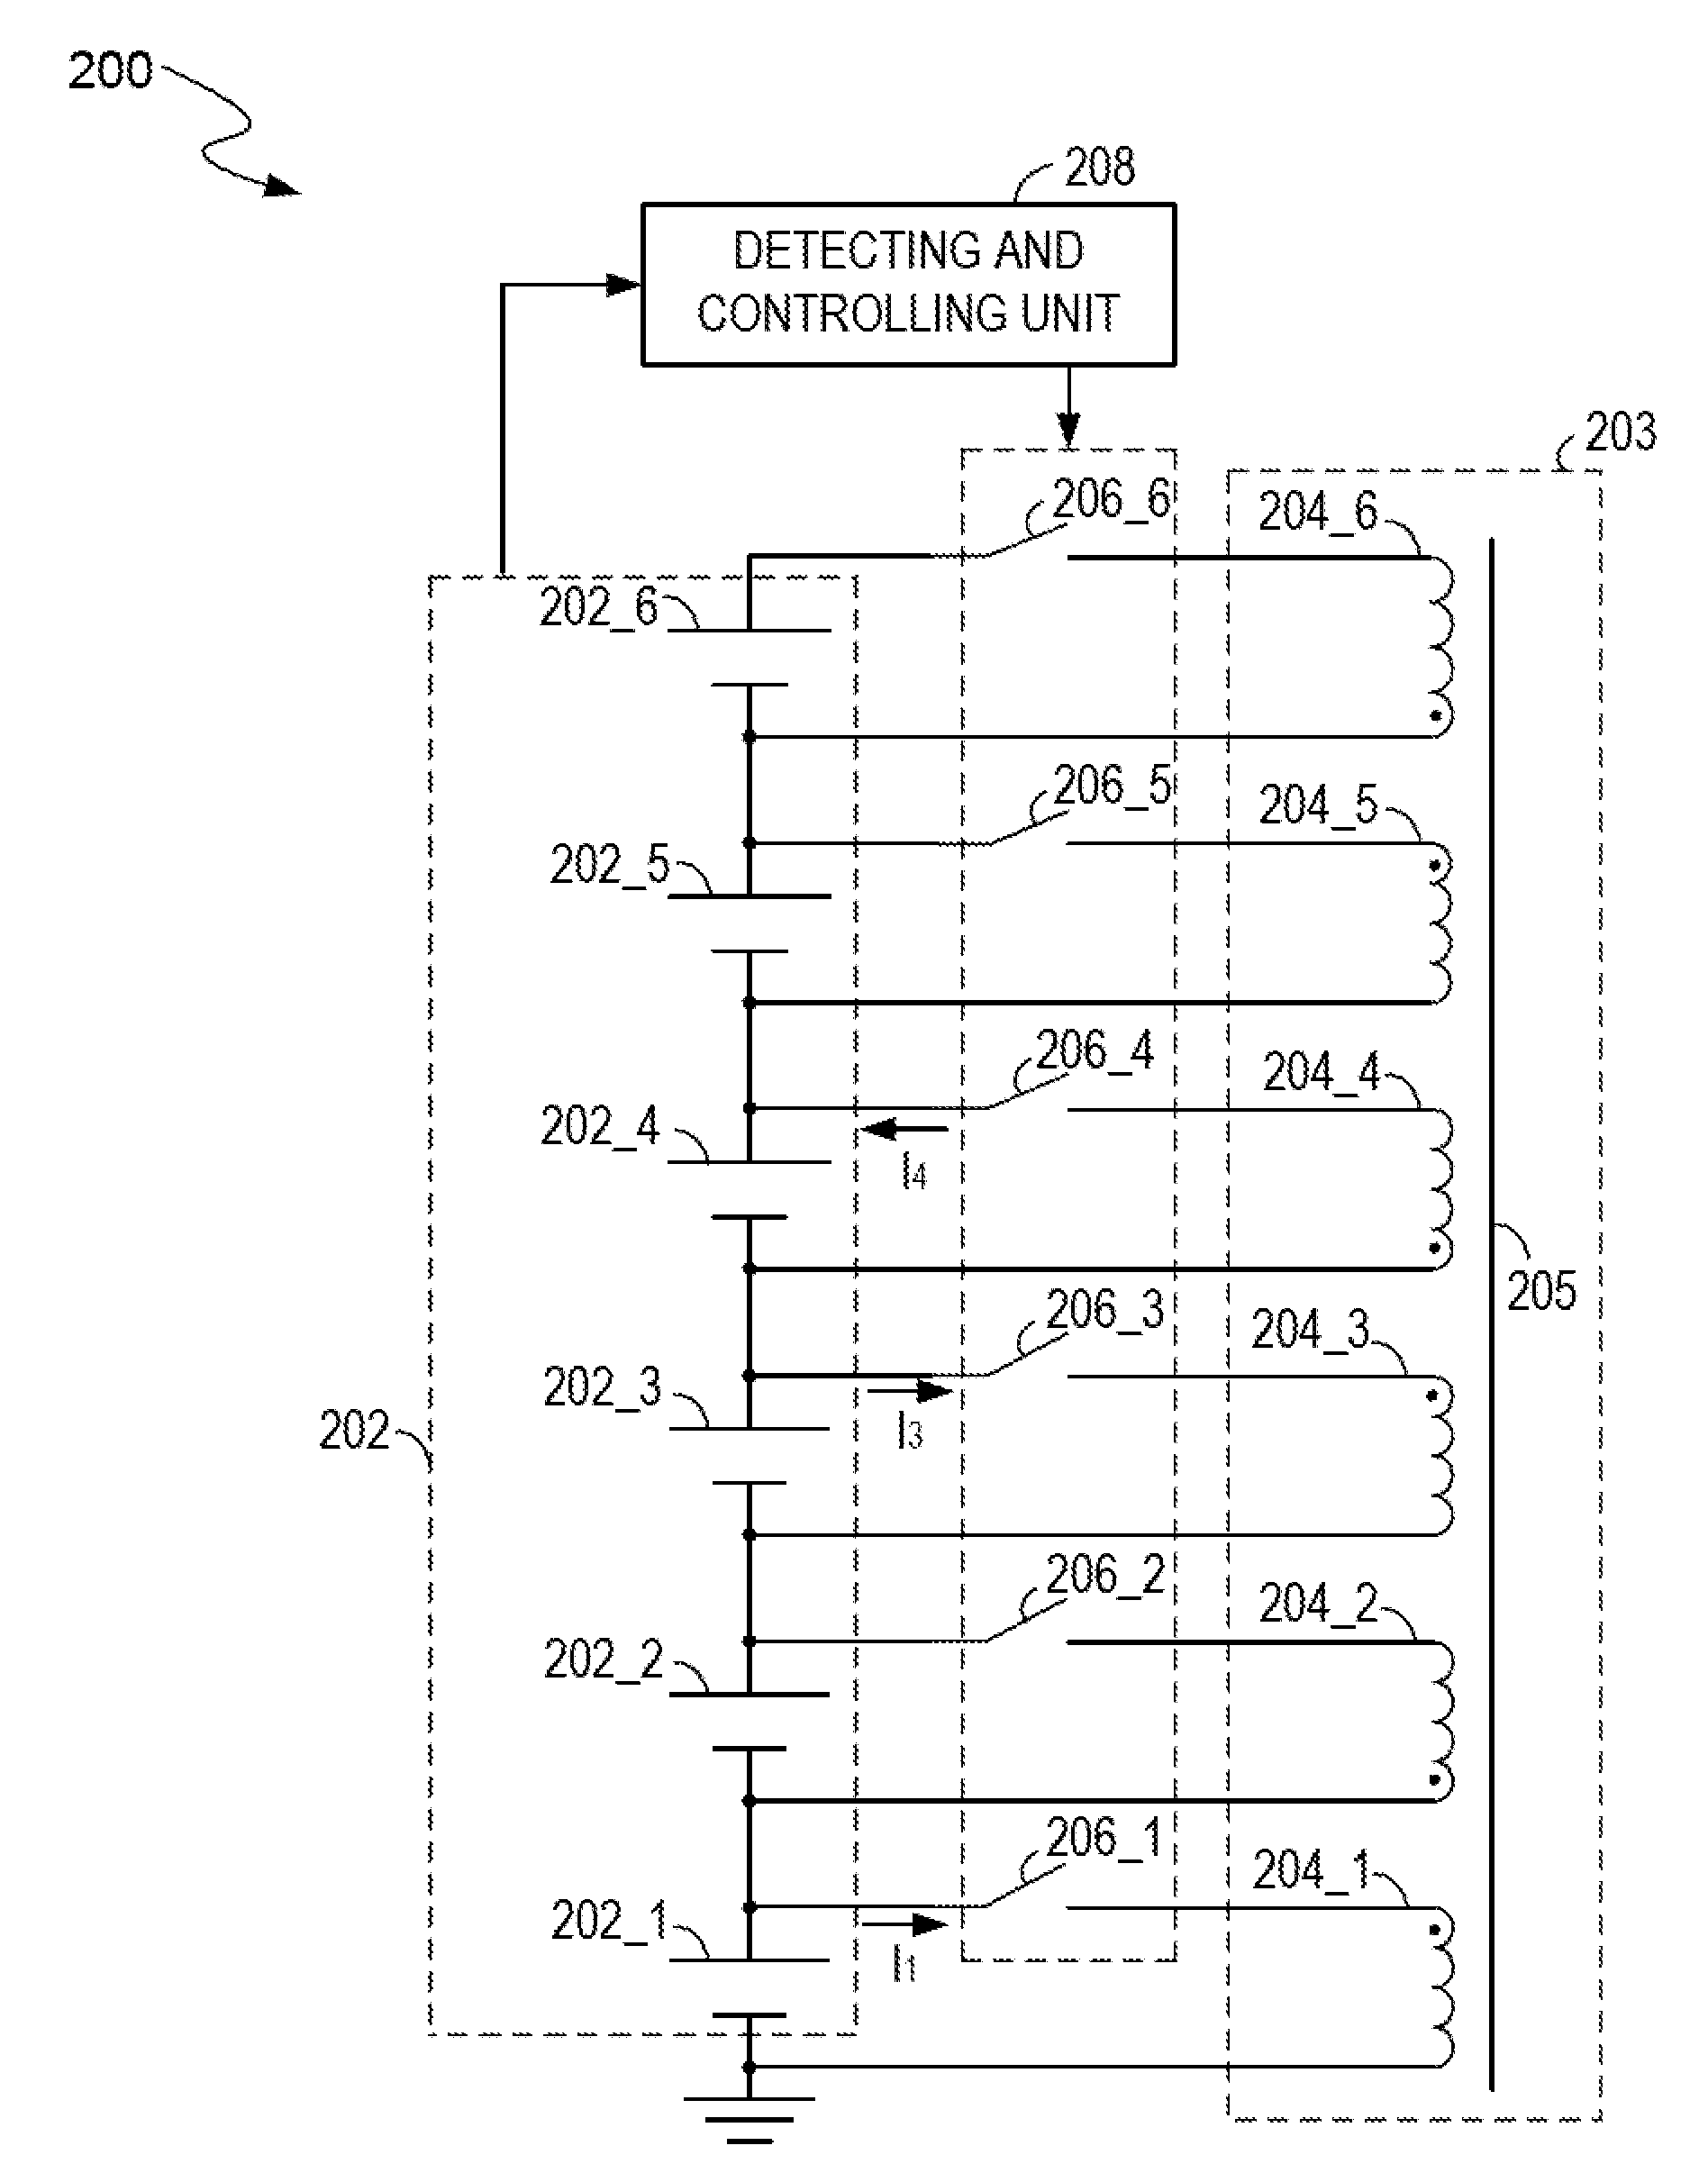 Battery management system with energy balance among multiple battery cells